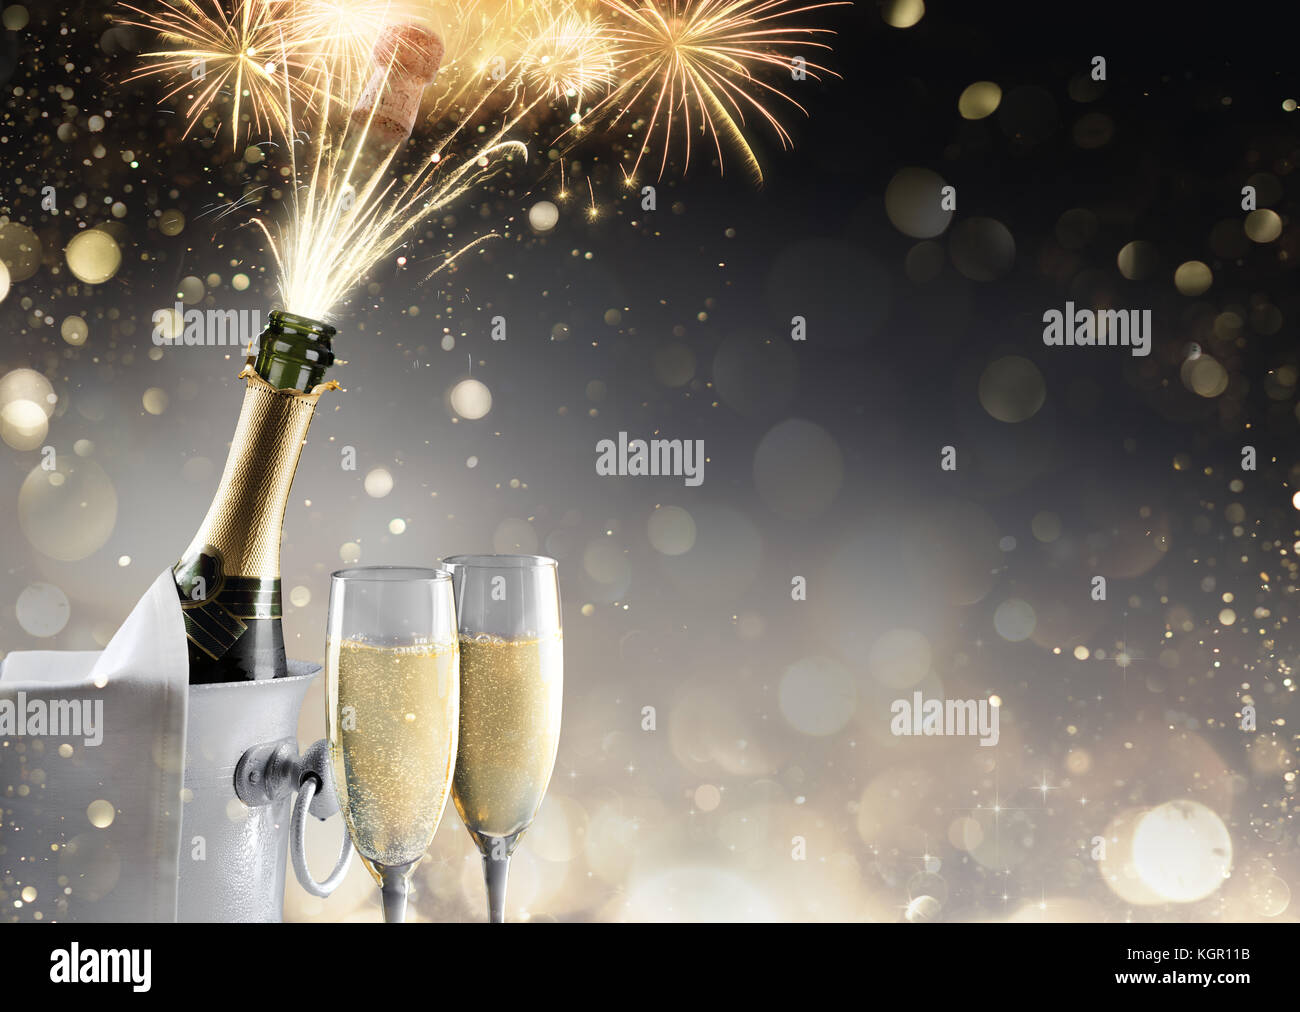 Champagne And Fireworks For Sparkling Celebration Stock Photo